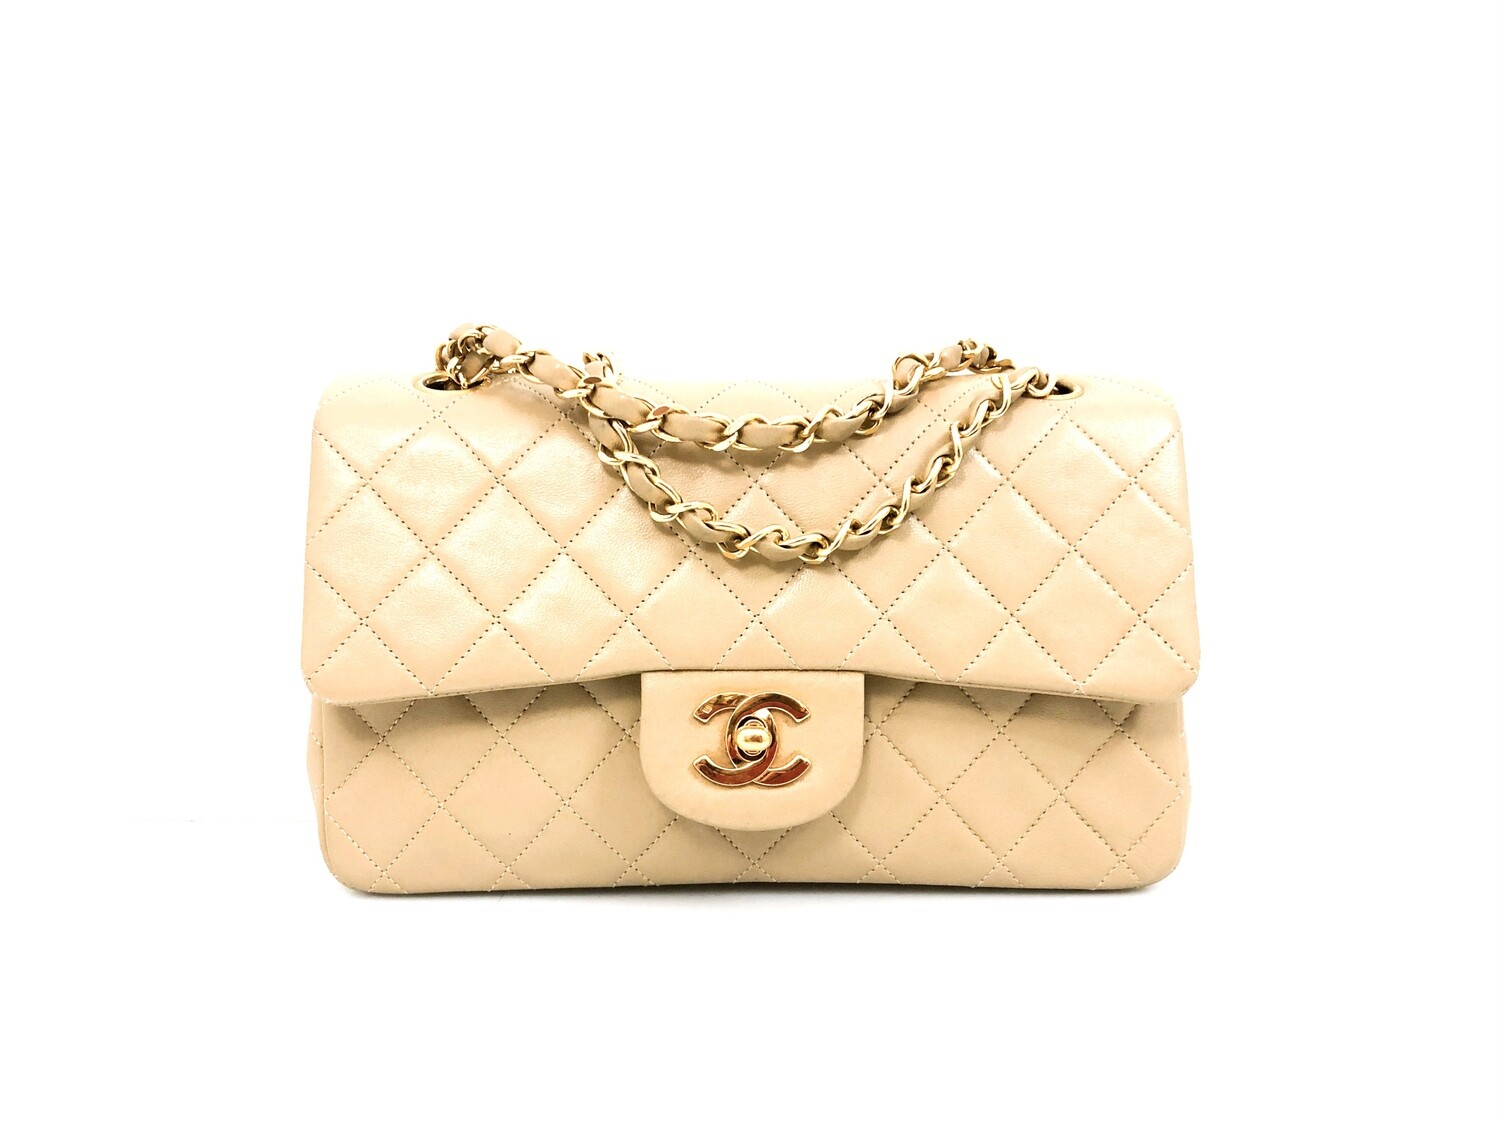 Chanel Timeless 2.55 small beige